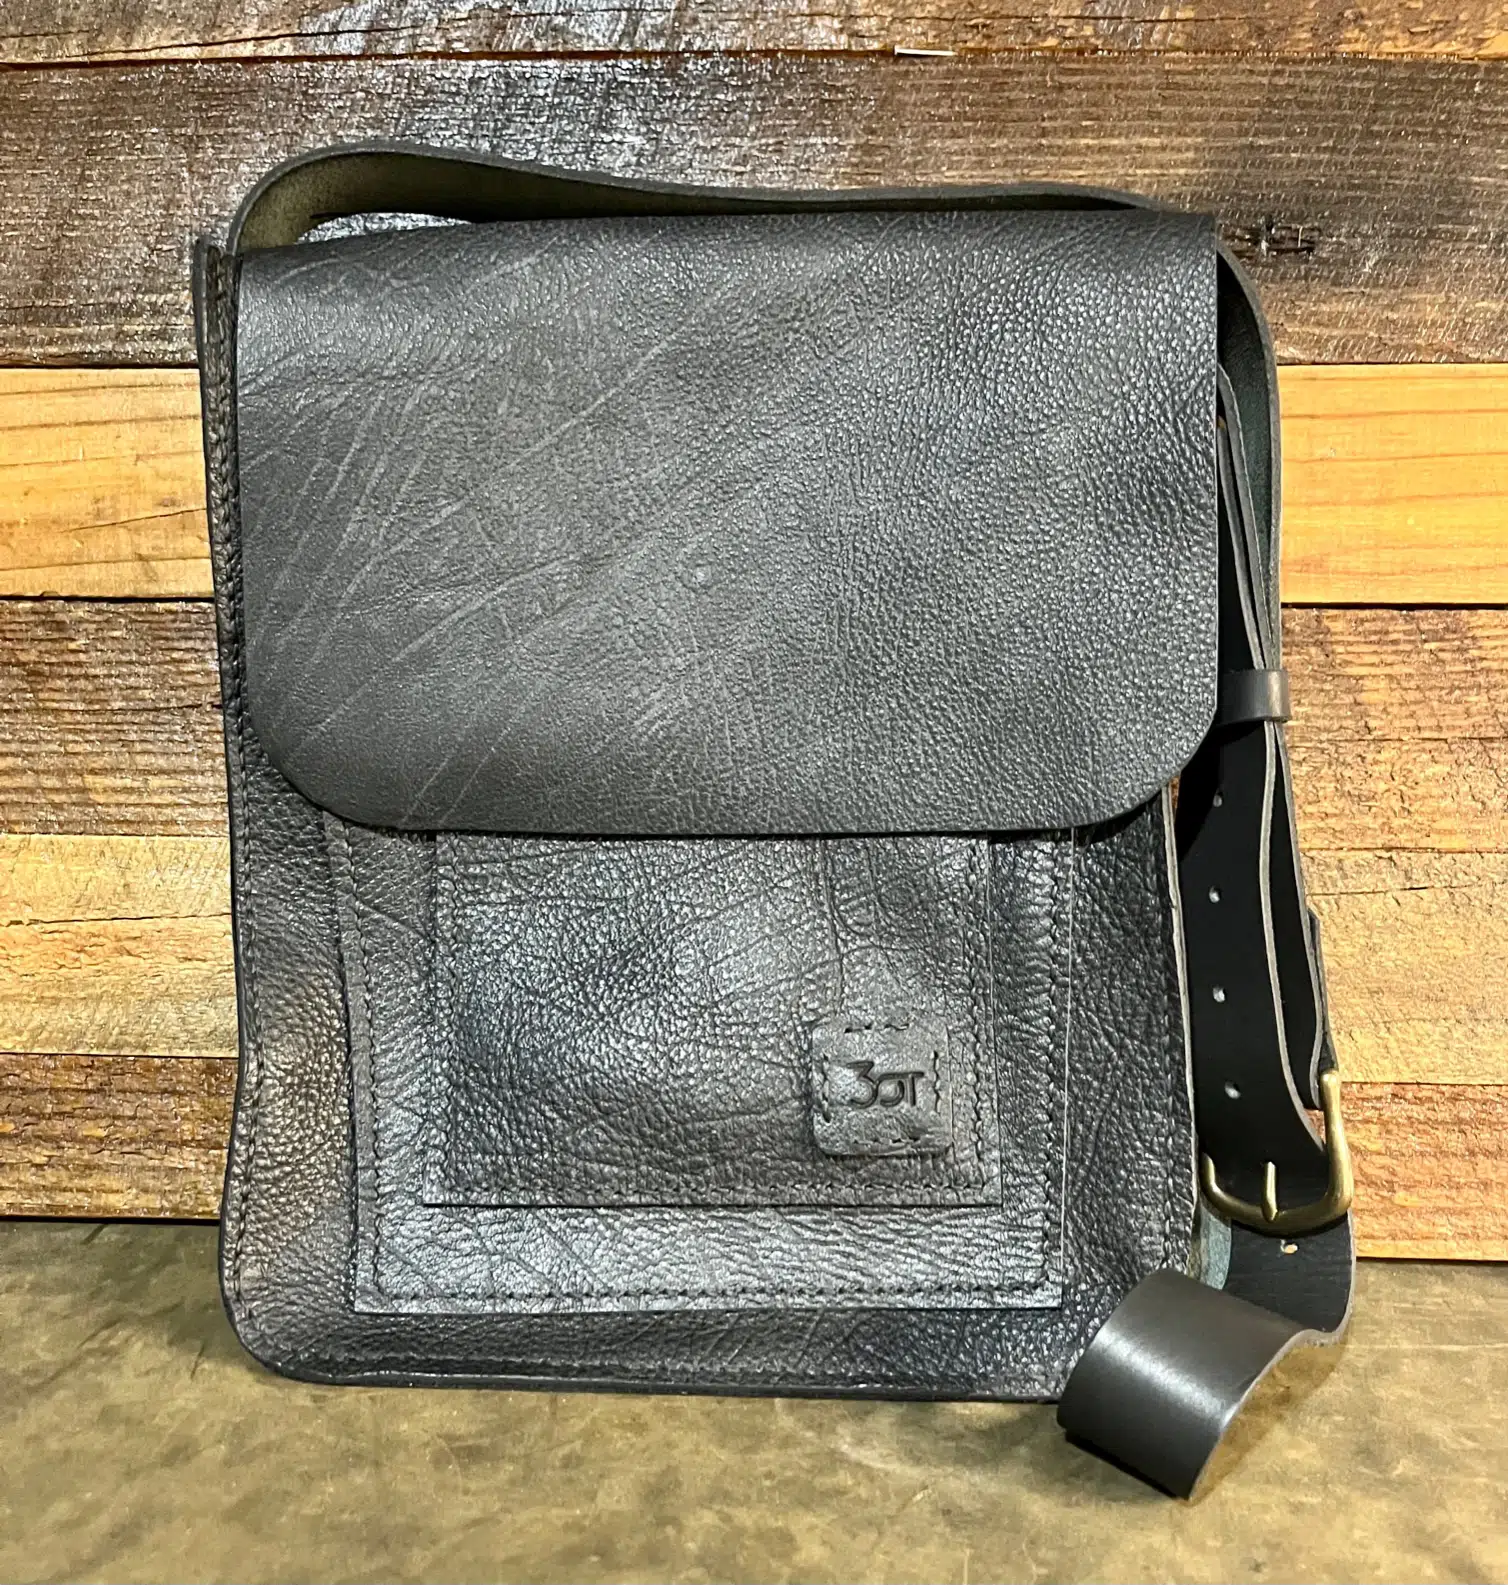 Three Oaks Outfitters Messenger Bag